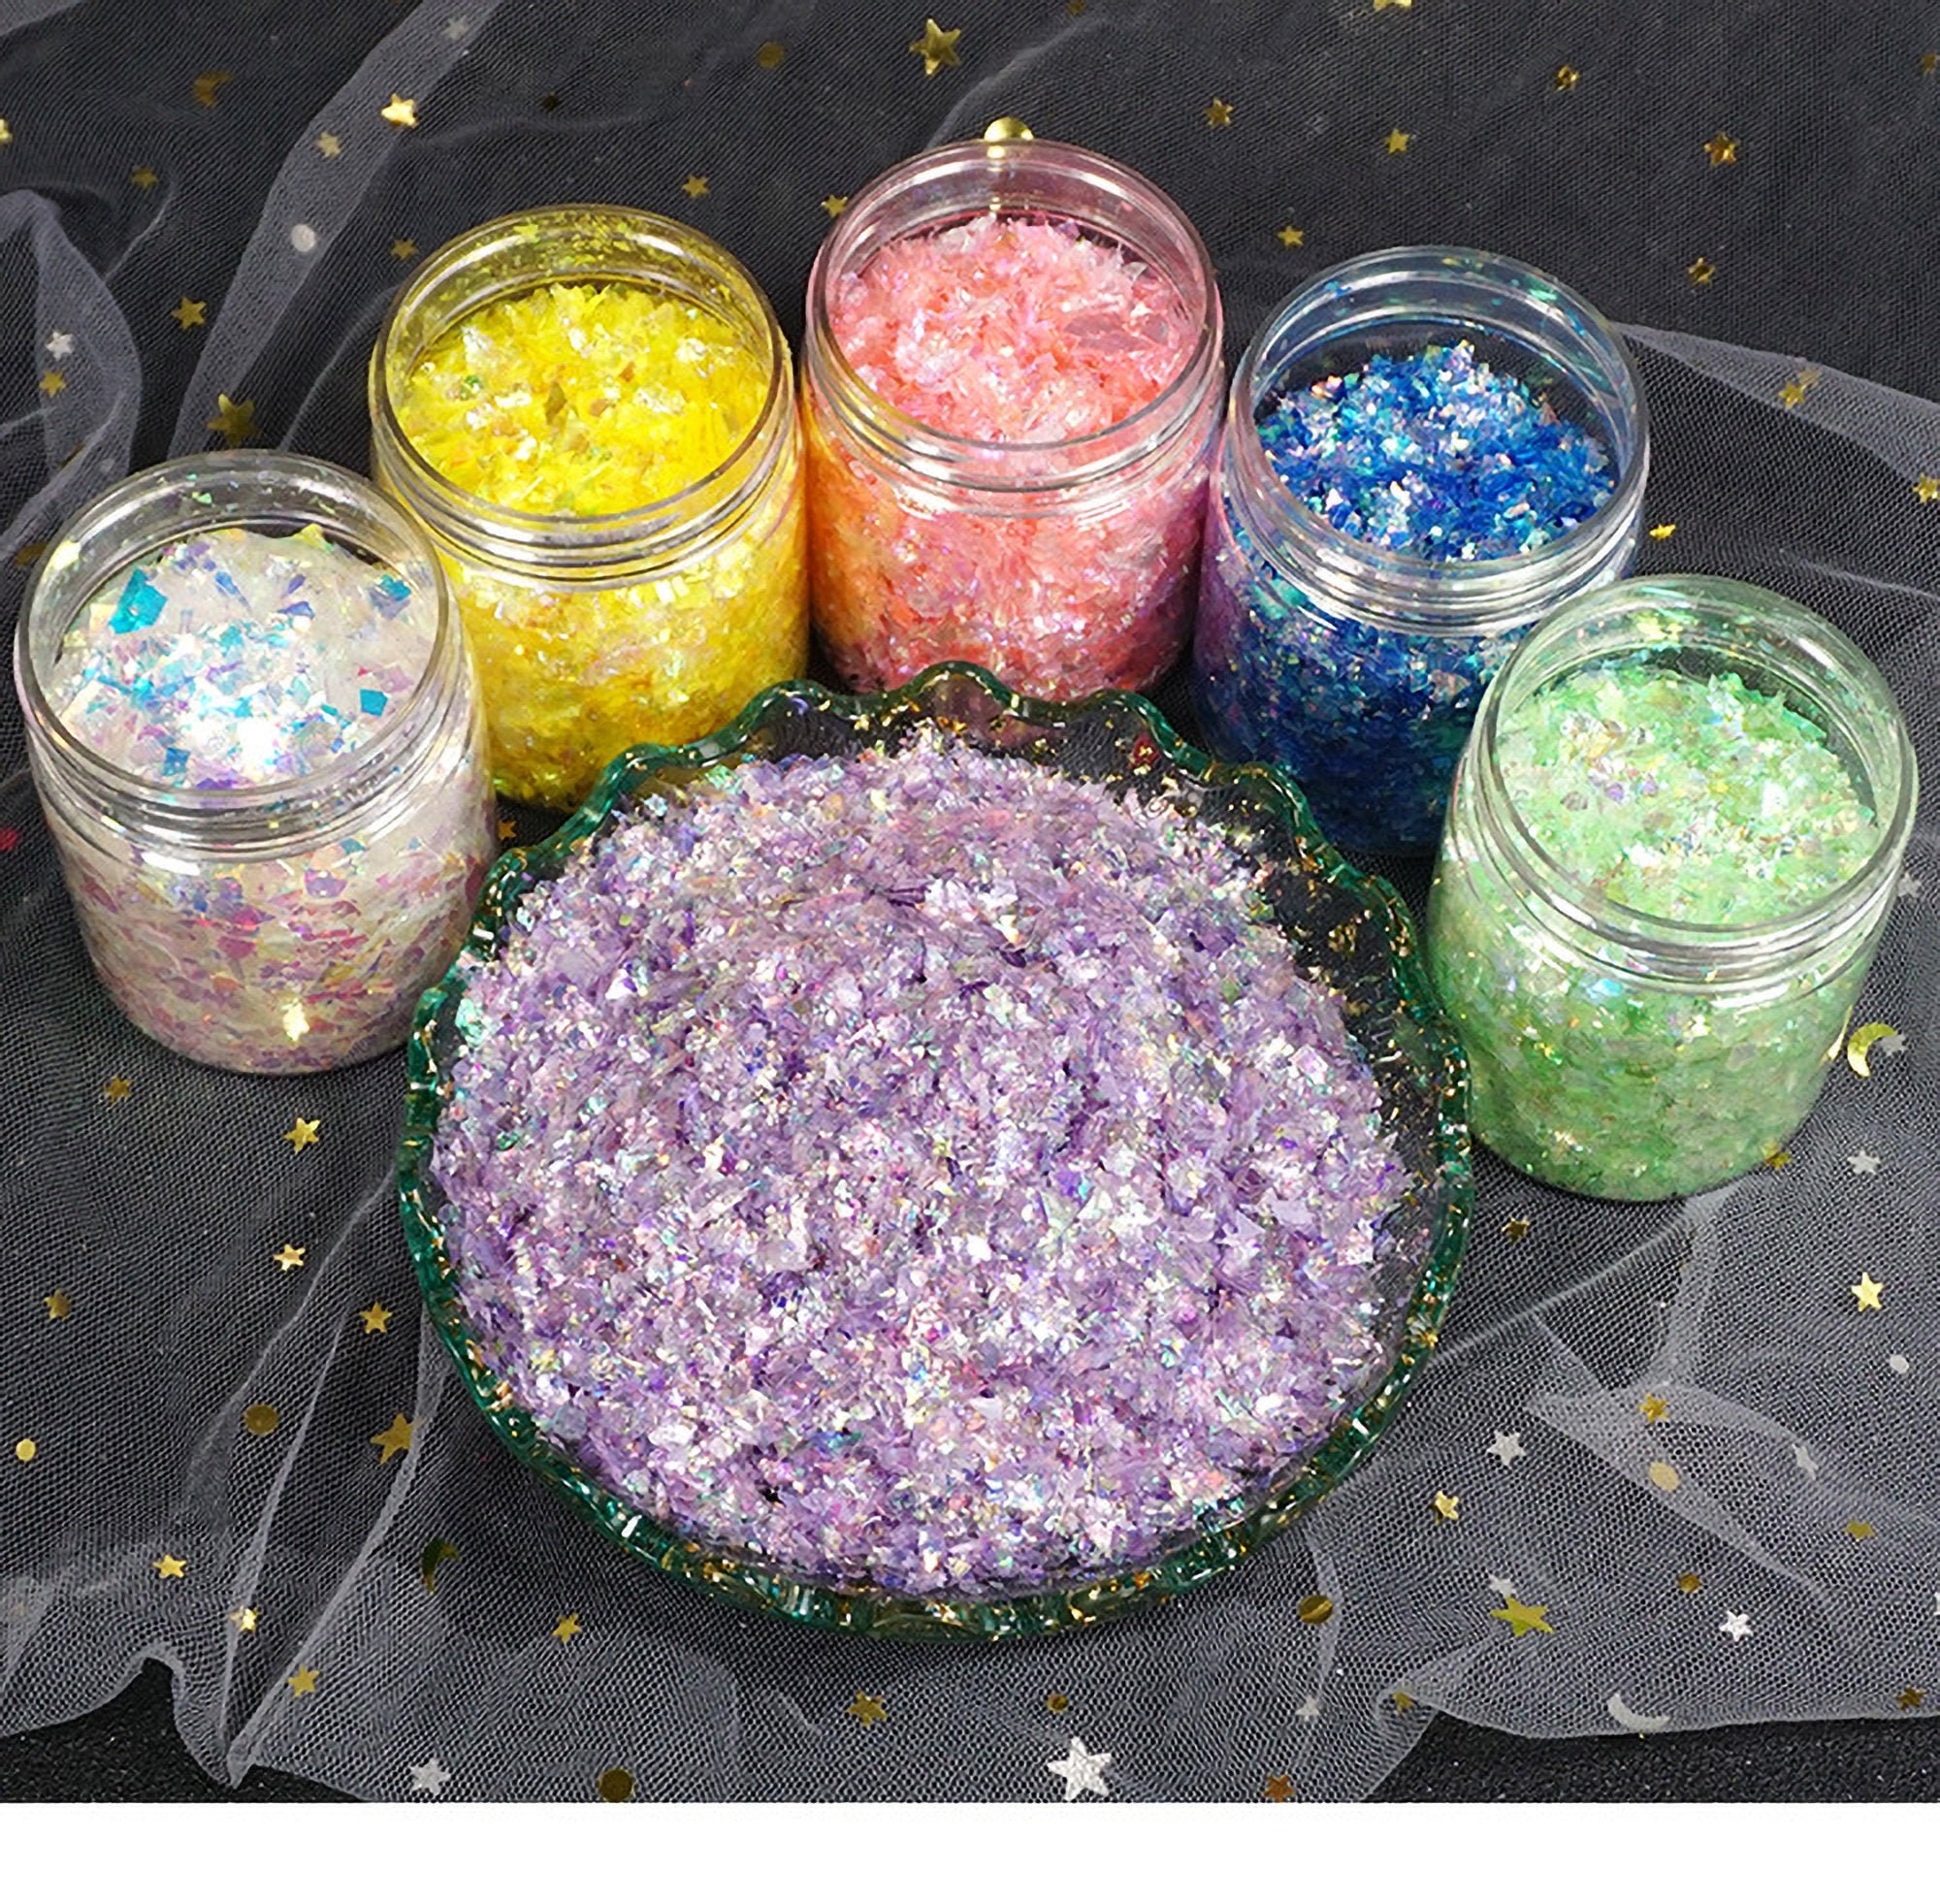 Holographic Glitter For Epoxy Resin Mold Filler Fillings Round